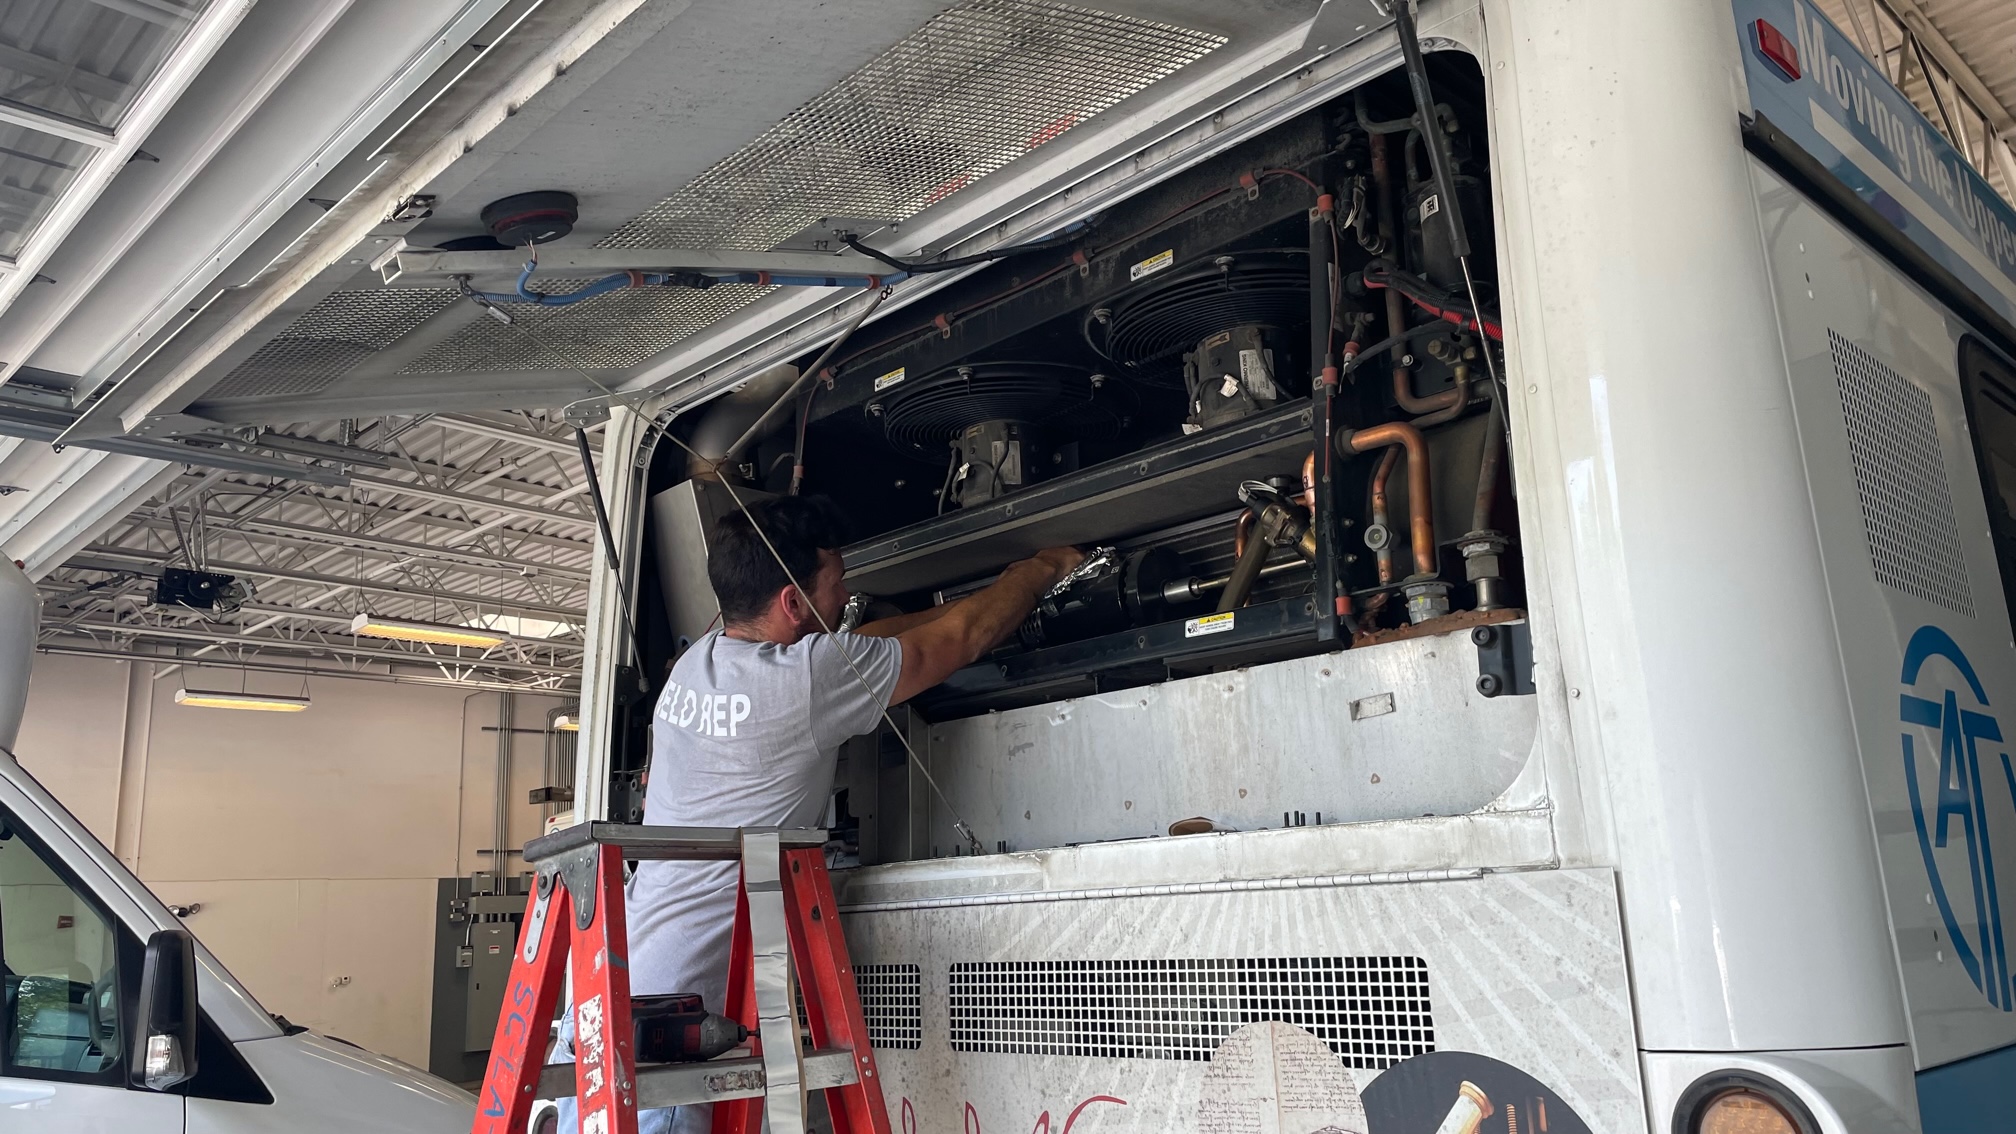 Field rep installing air purification system in AT bus